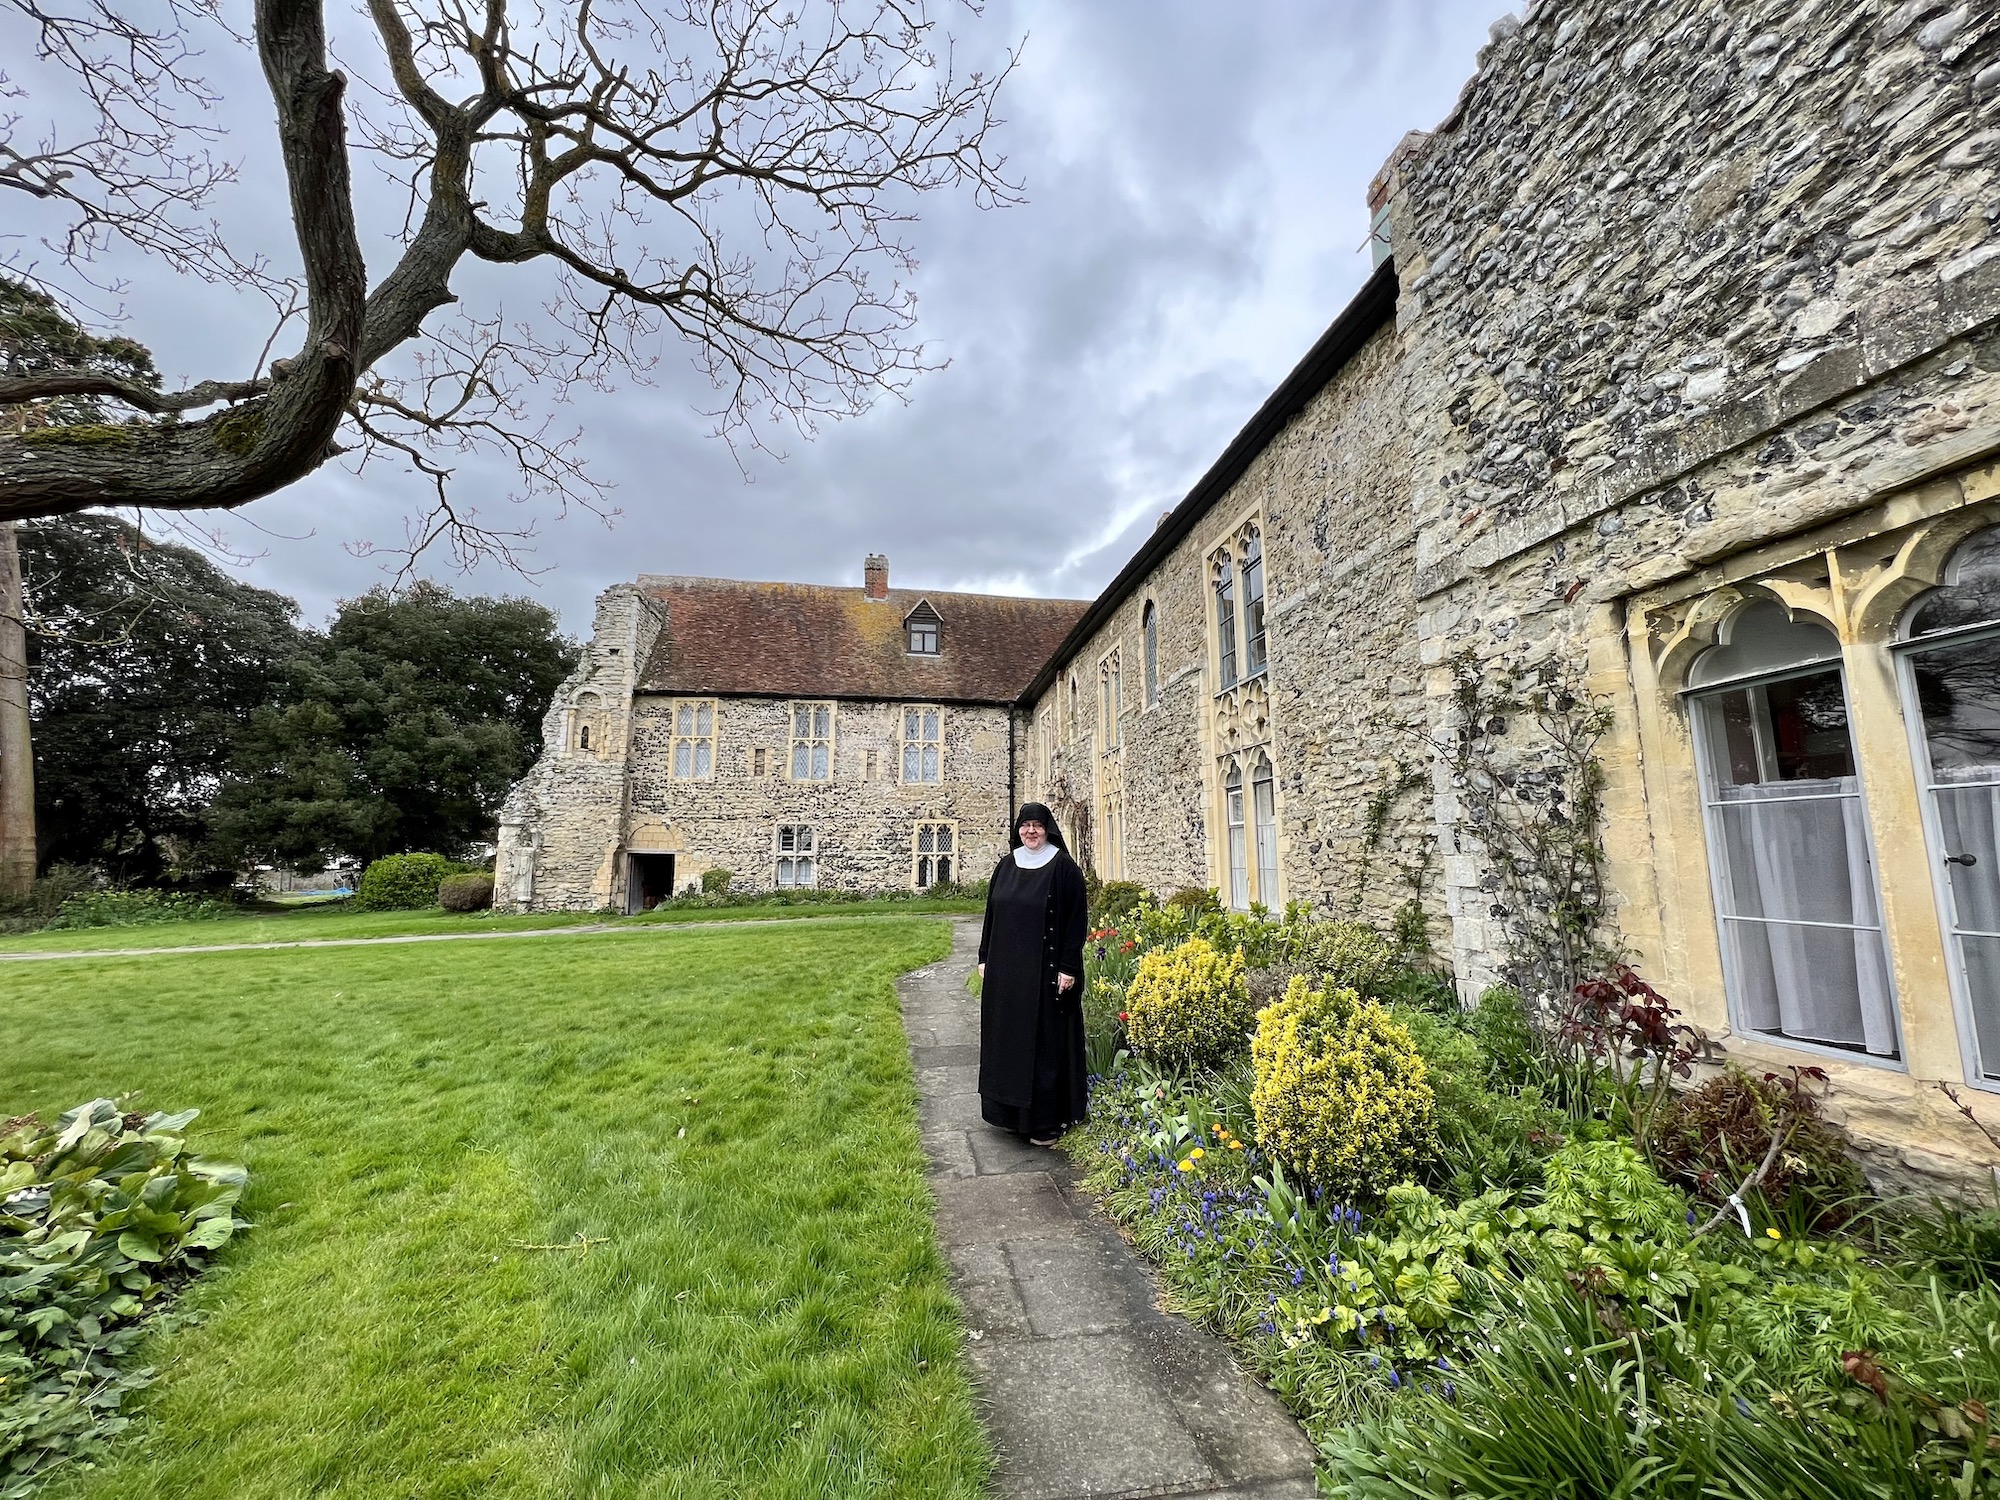 You are currently viewing Minster Abbey: St Mildred’s Priory with the Prioress Mother Nikola